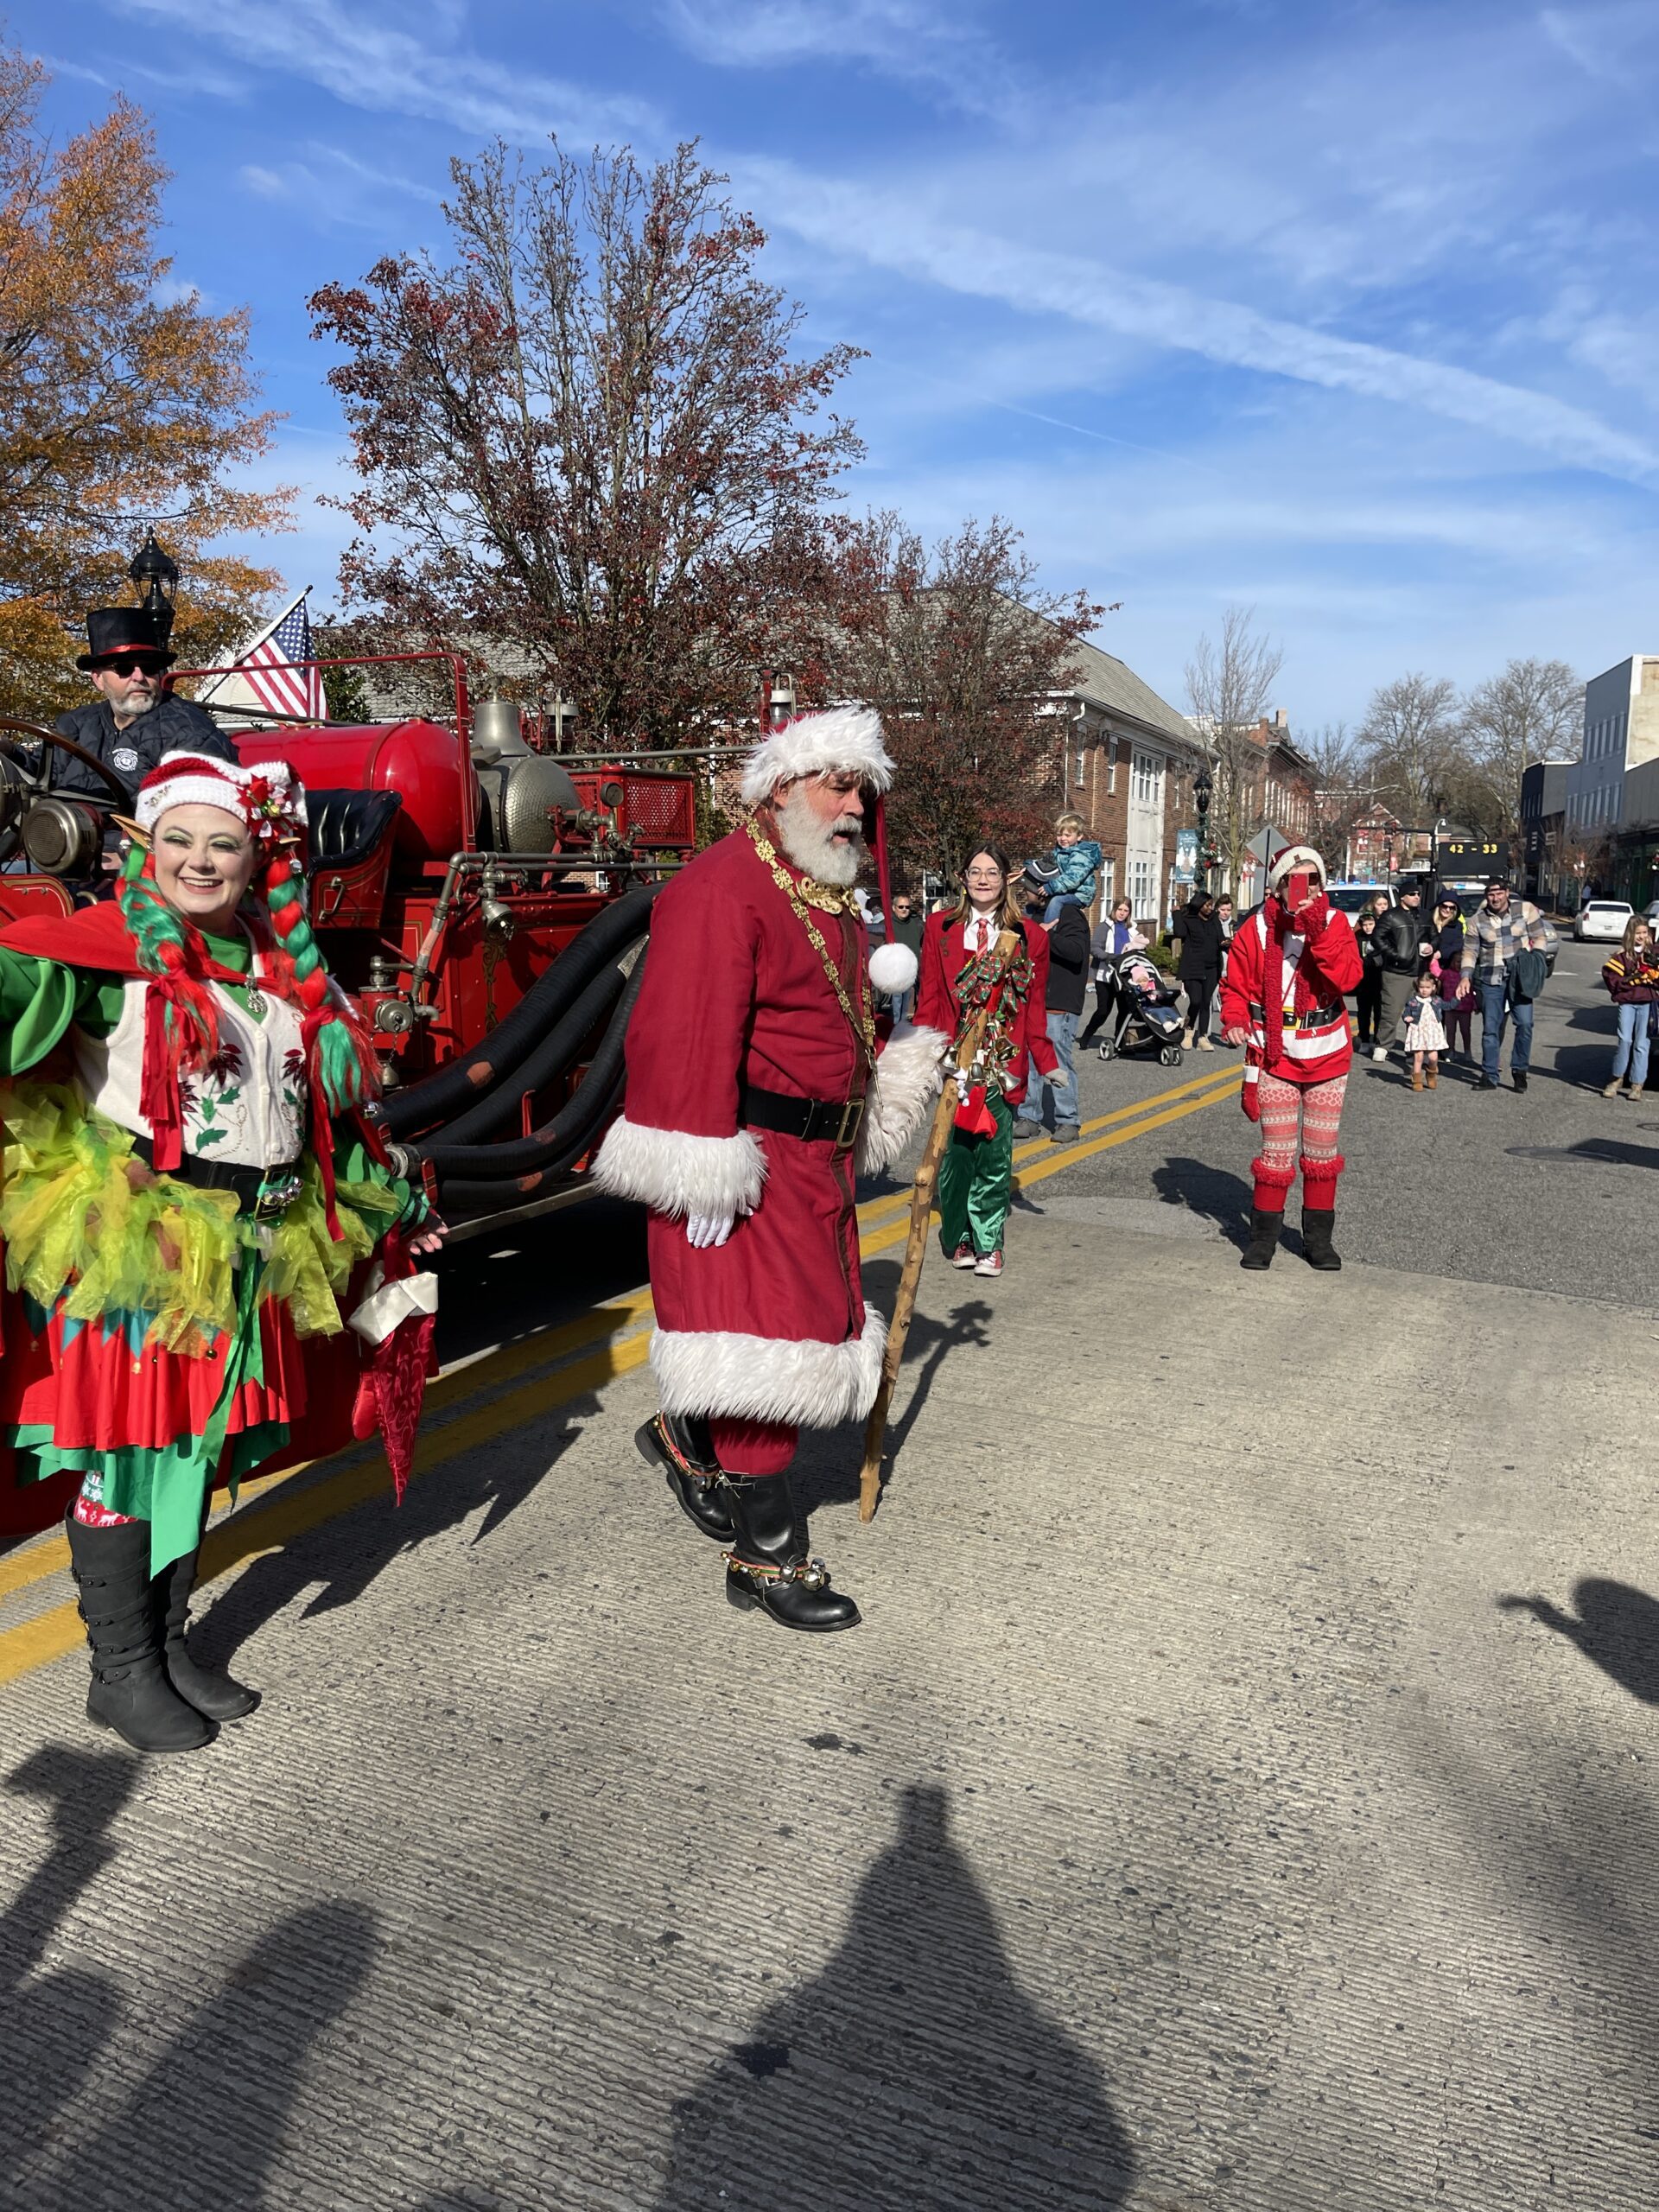 Featured image for “Santa arrives with great fanfare in Milford”